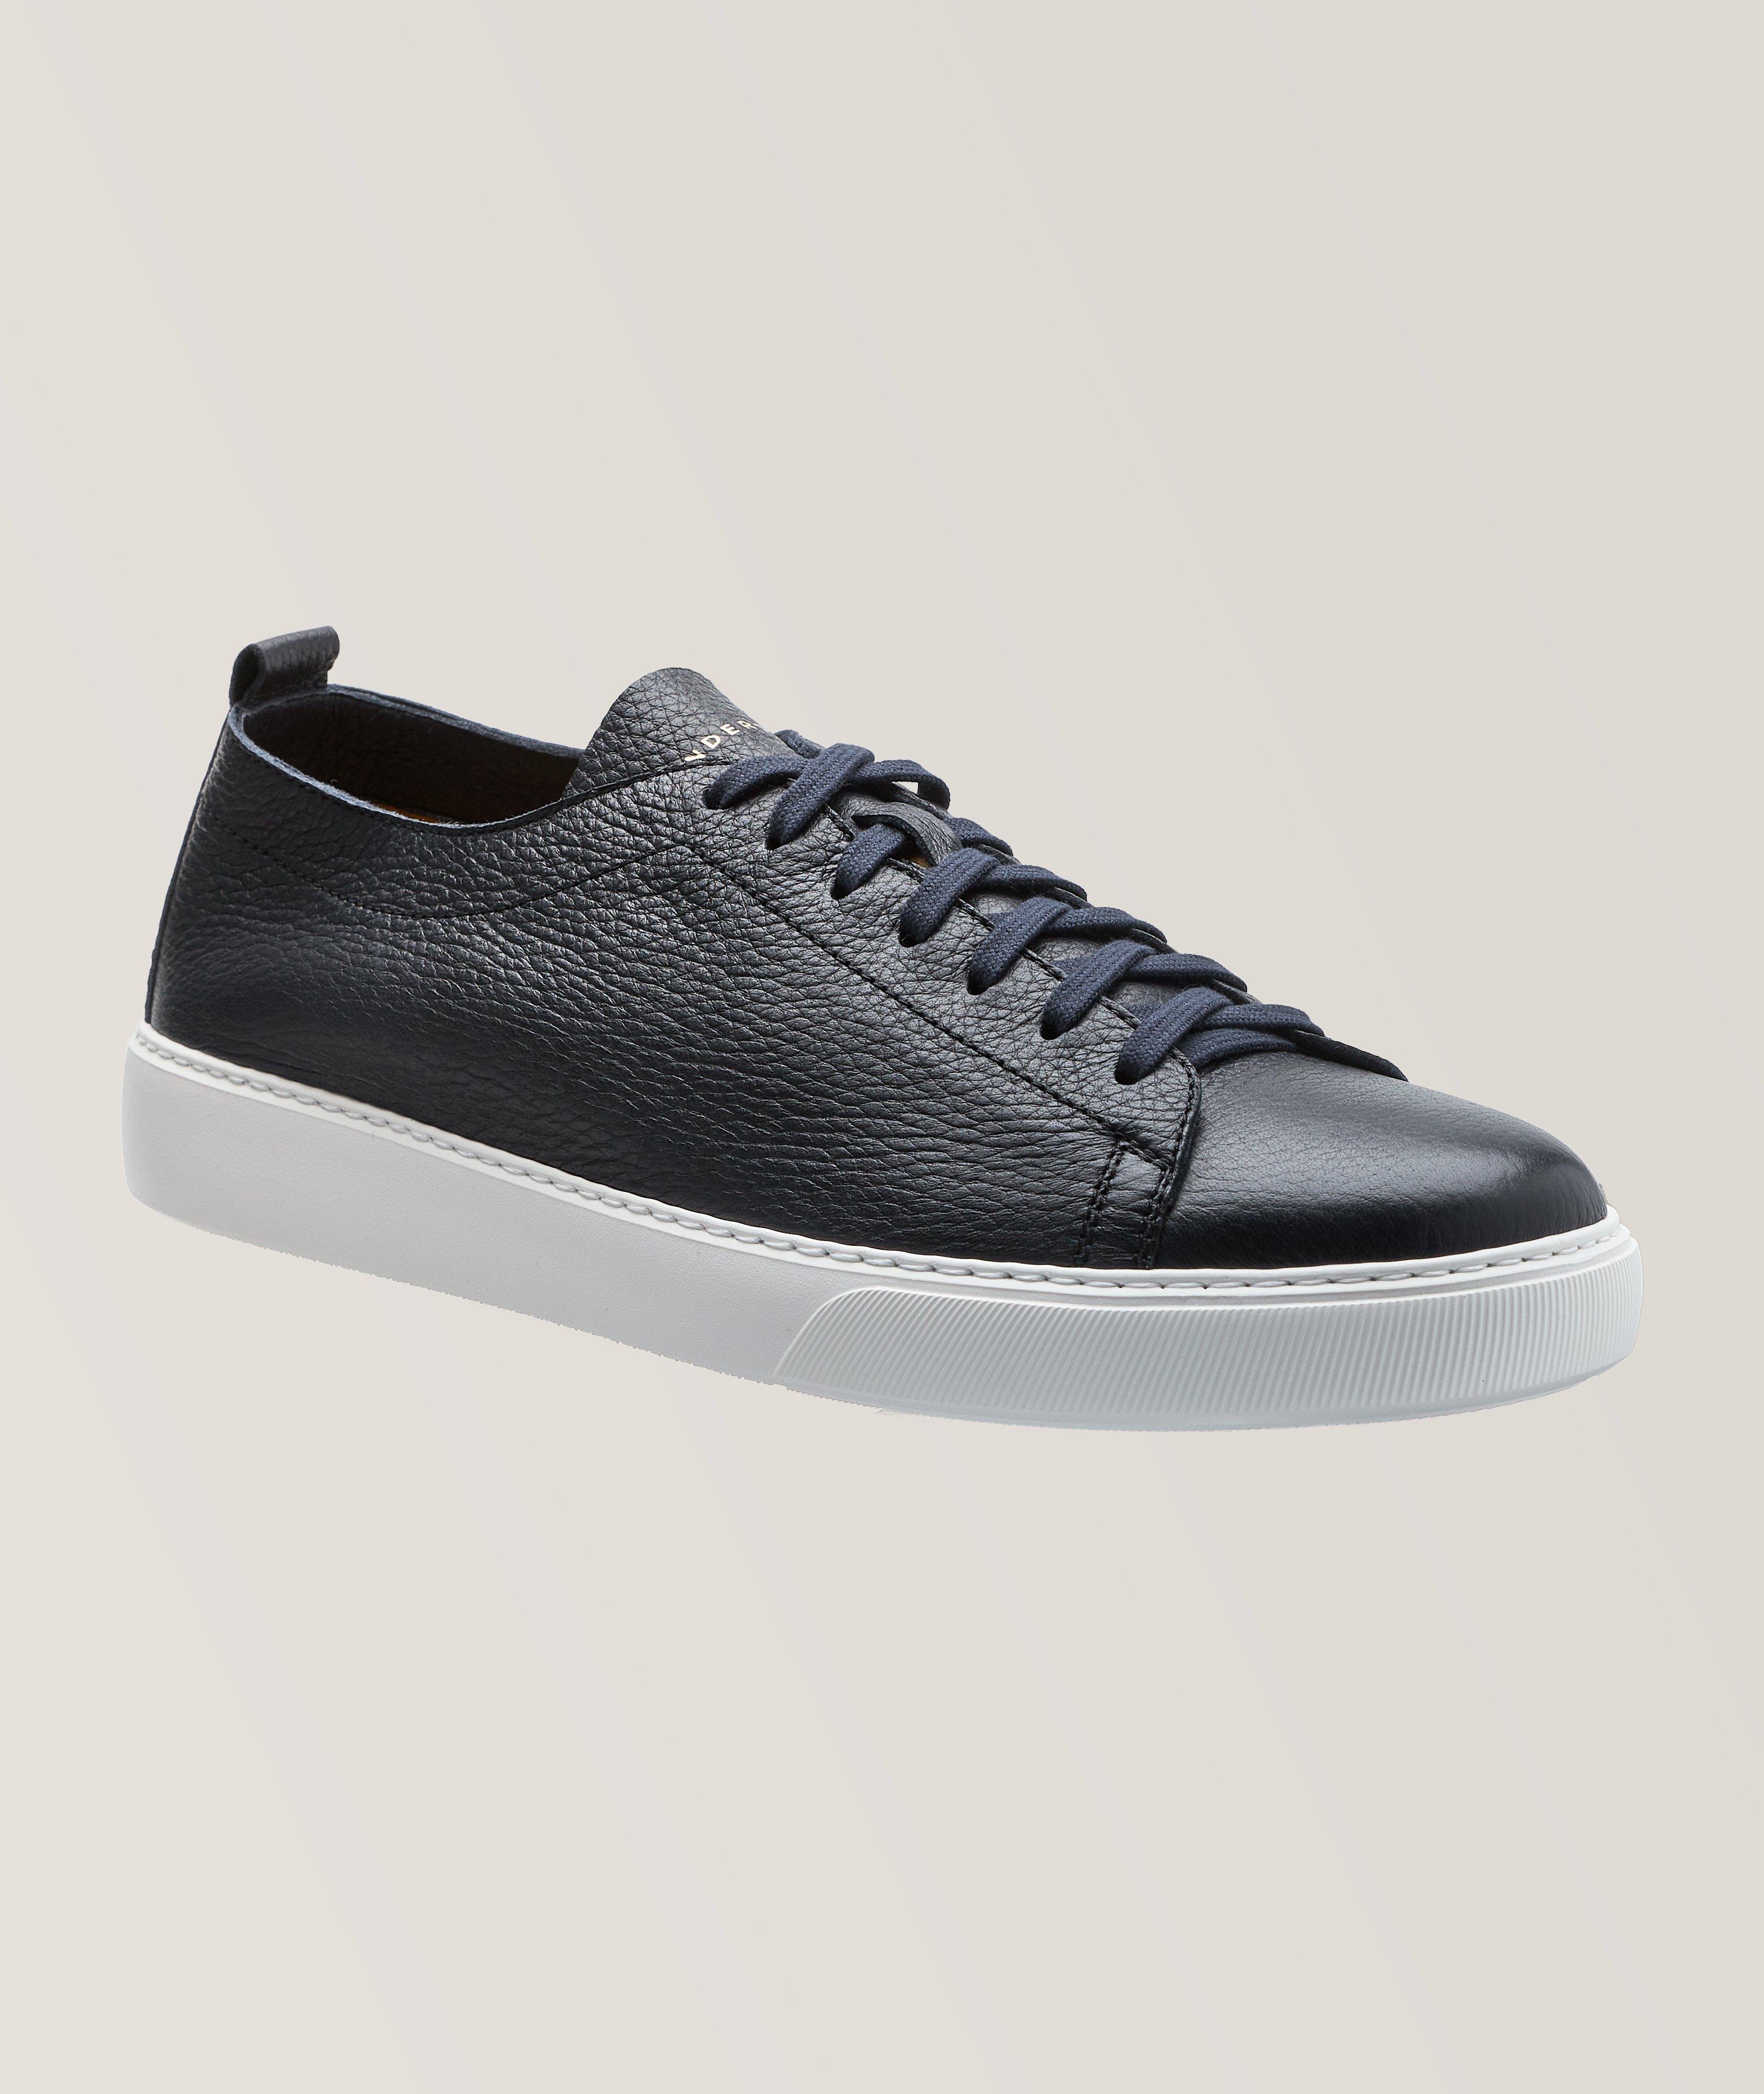 Grain Leather Byron Sneakers image 0